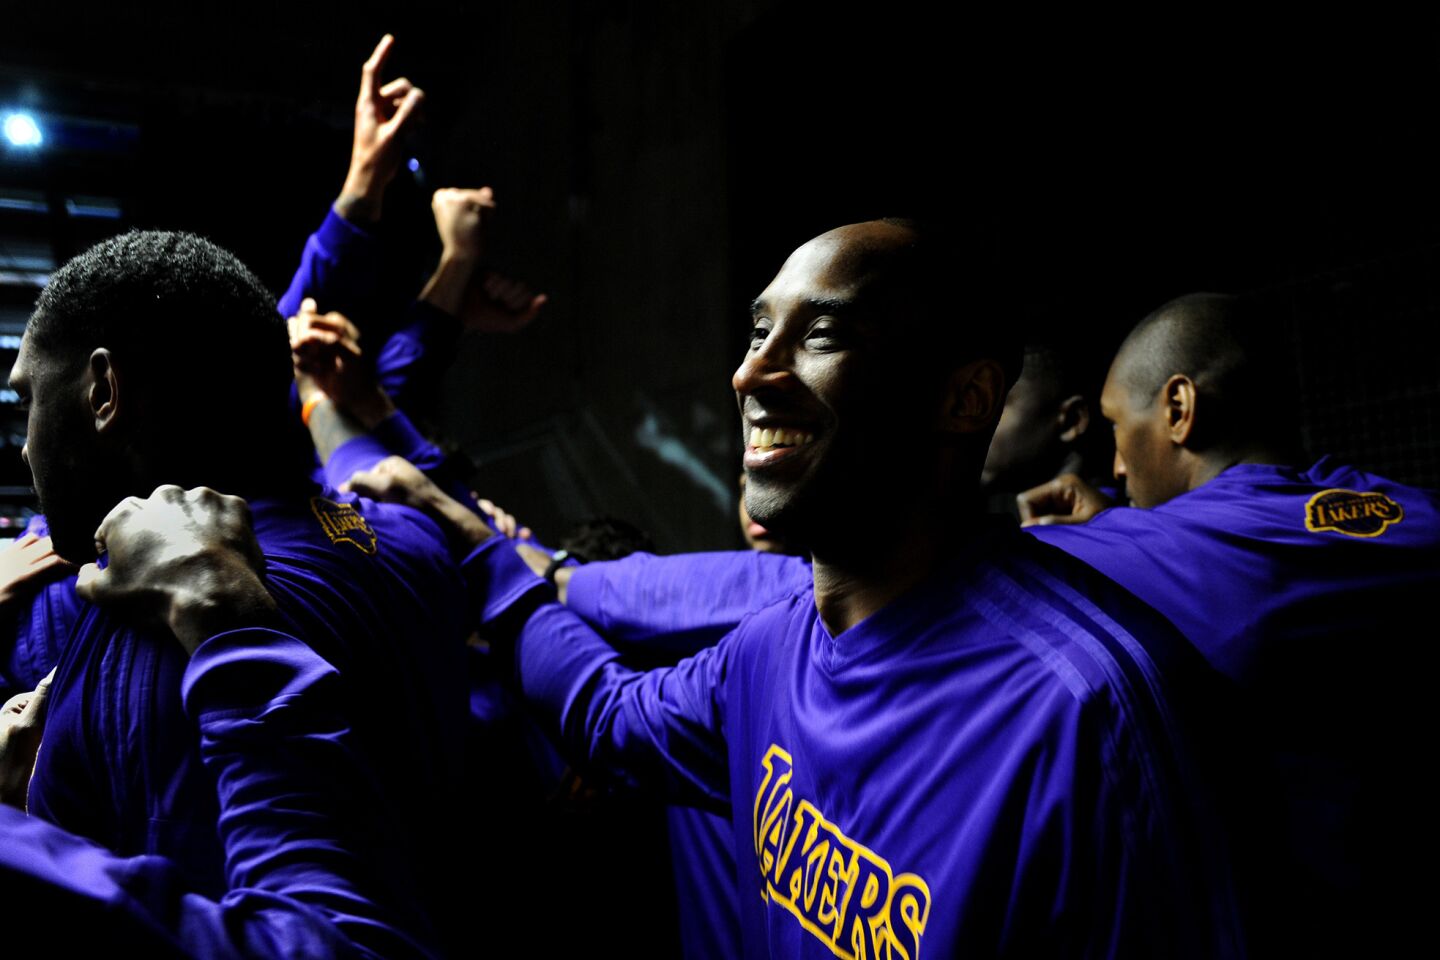 Kobe Bryant laughs as he joins the huddle before taking the court against the host Pelicans.